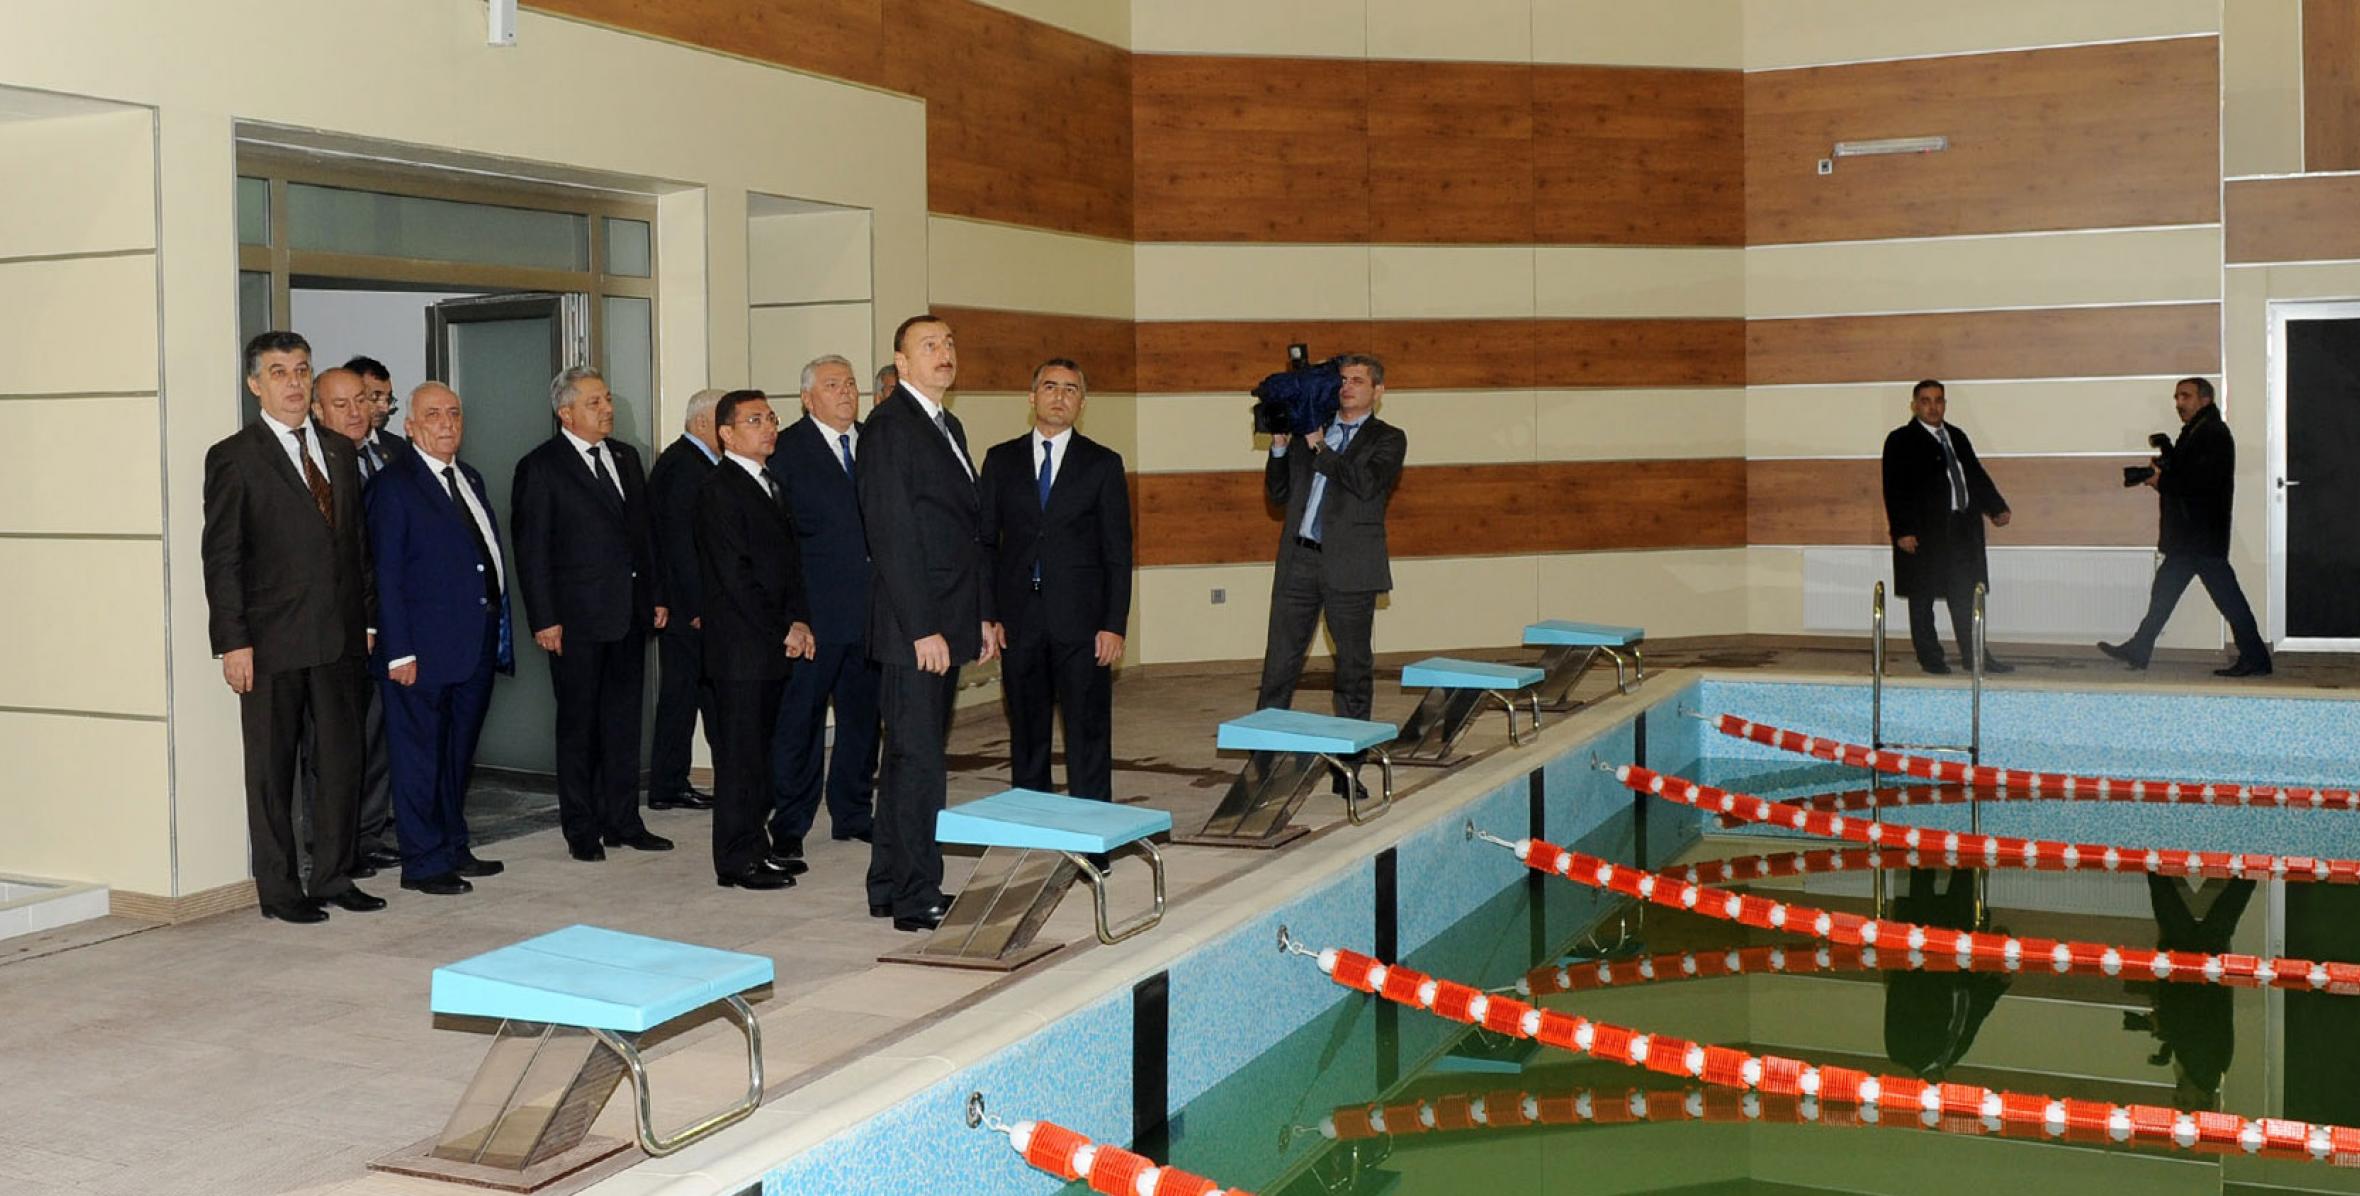 Ilham Aliyev reviewed the Shaki Olympic Sports Center after reconstruction